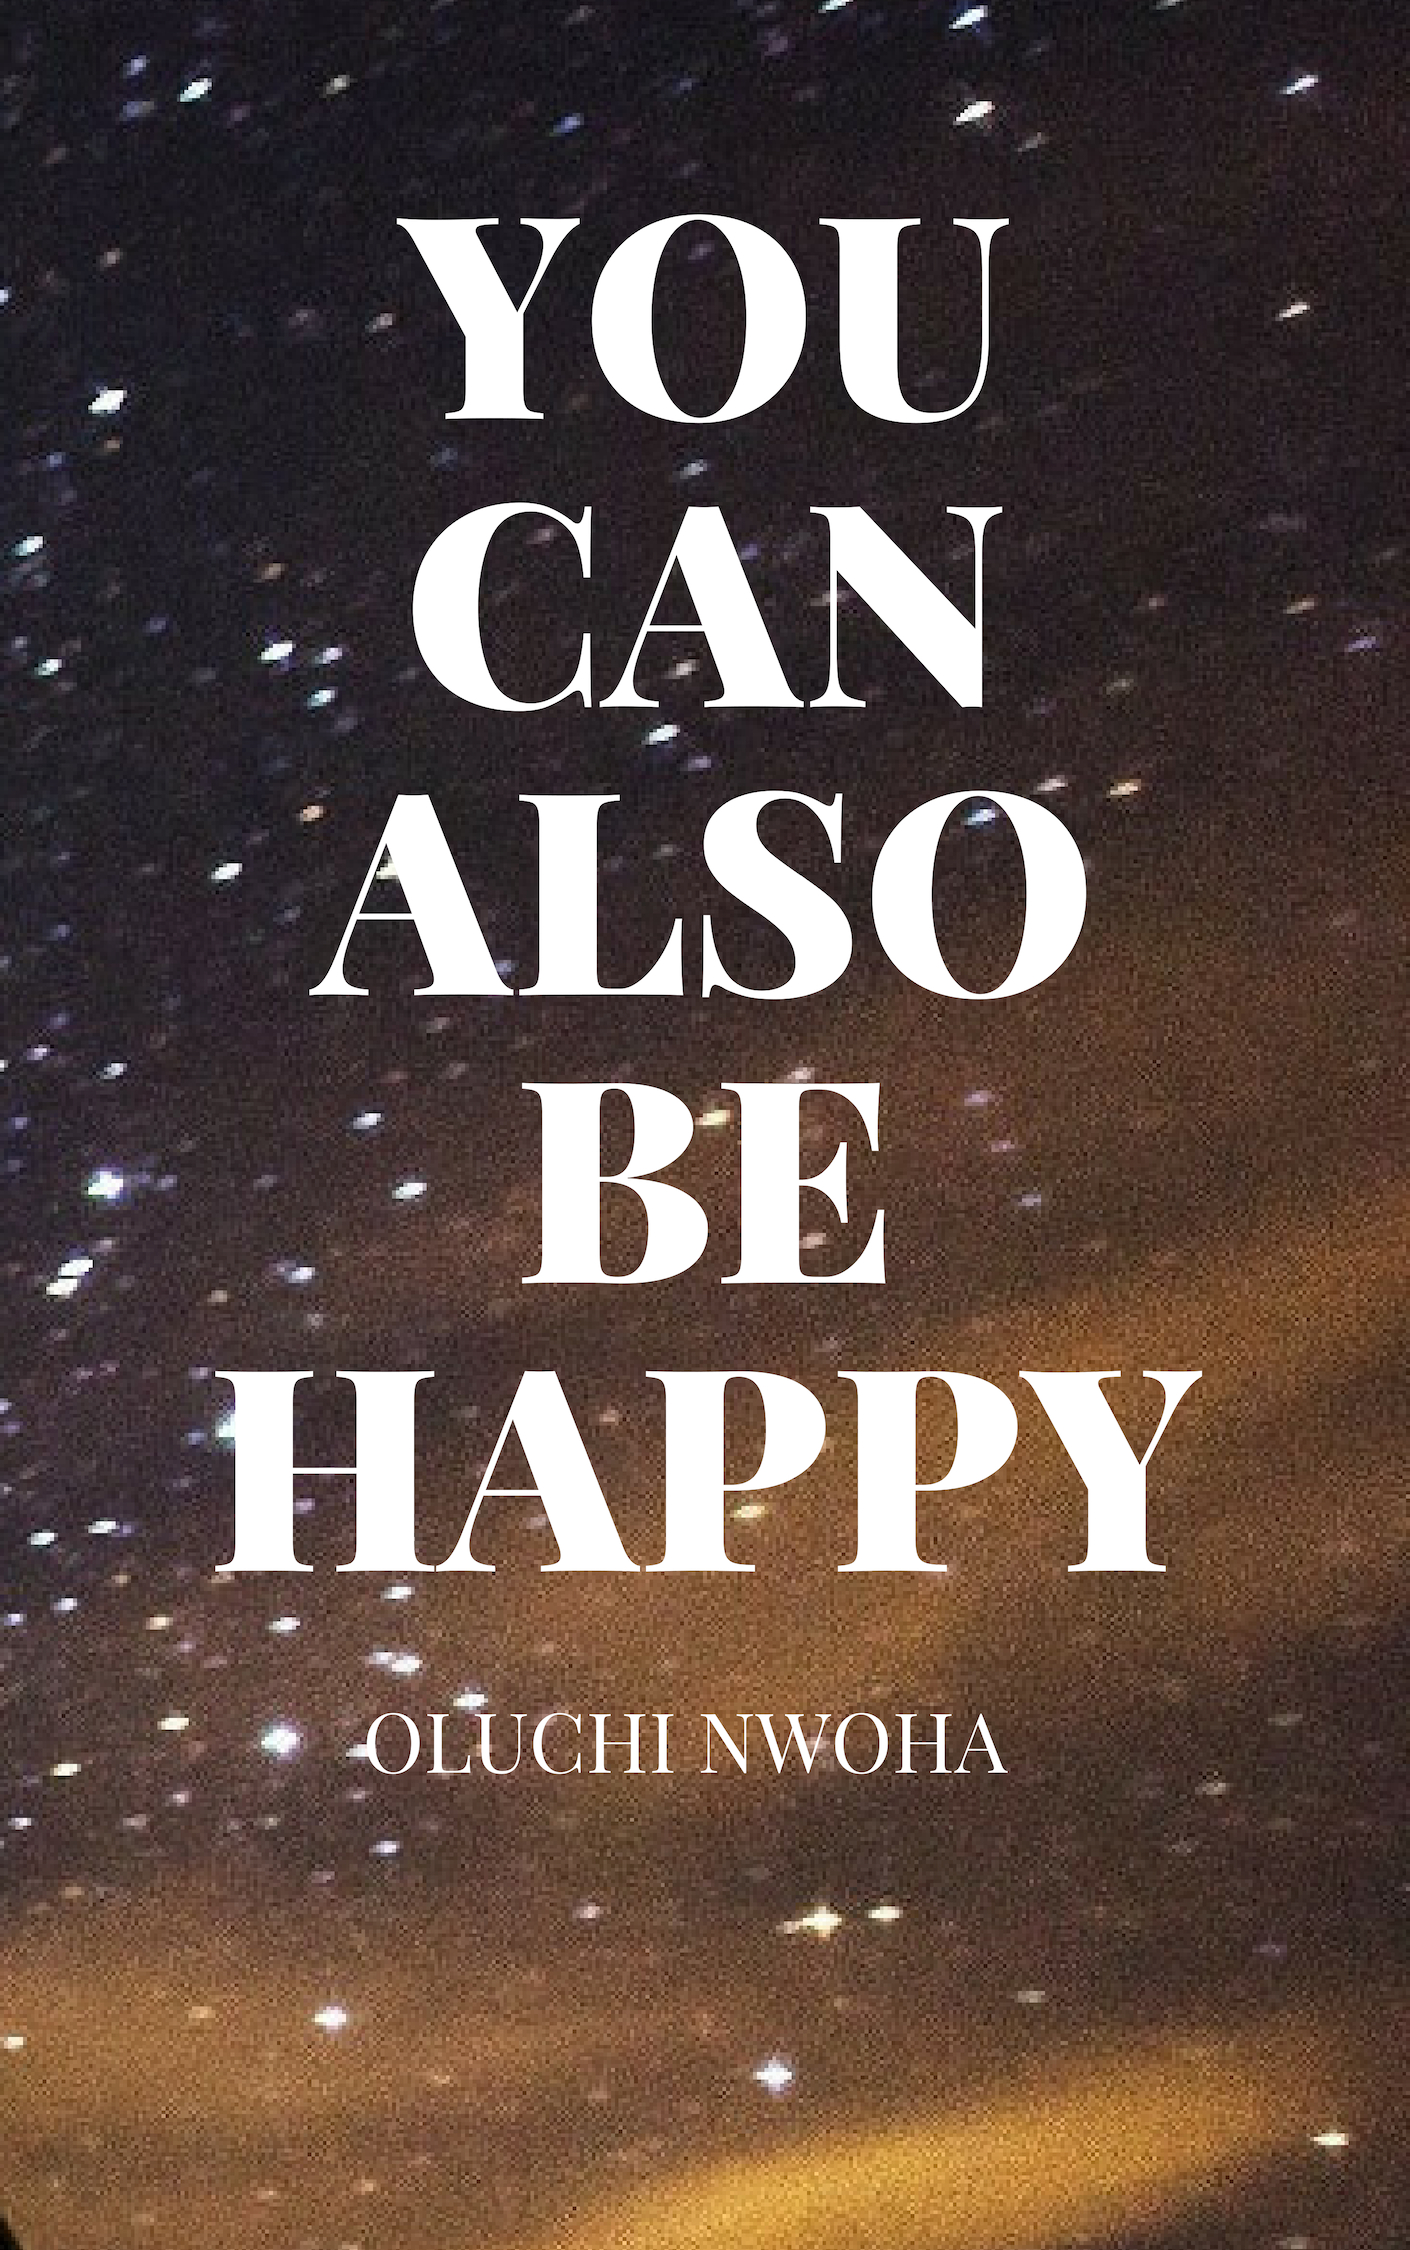 You can also be happy